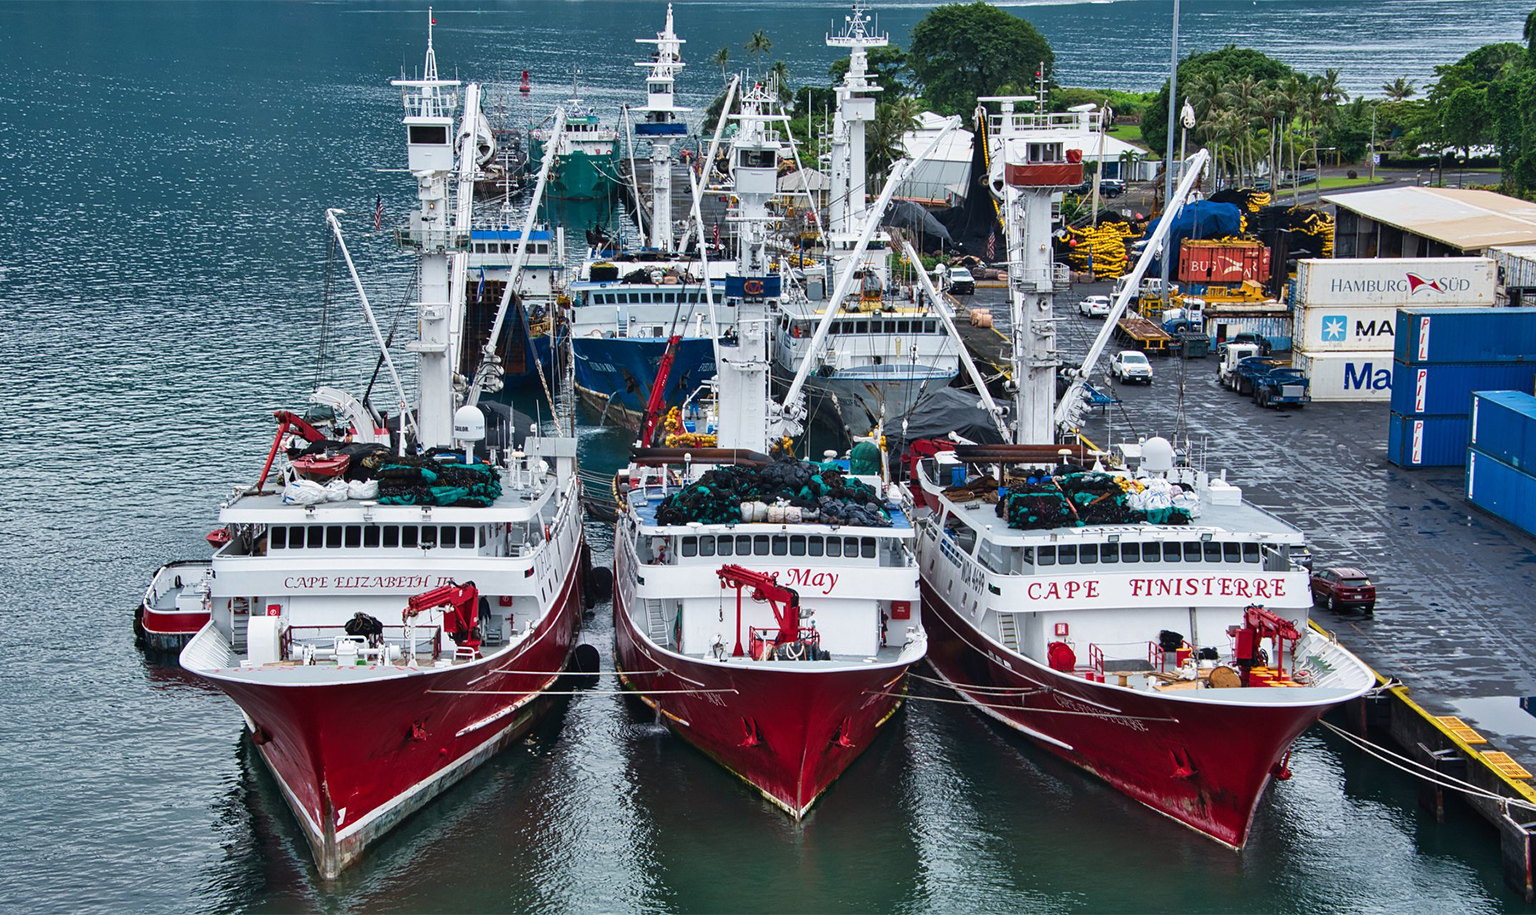 Three purse seiners docked at a shore.